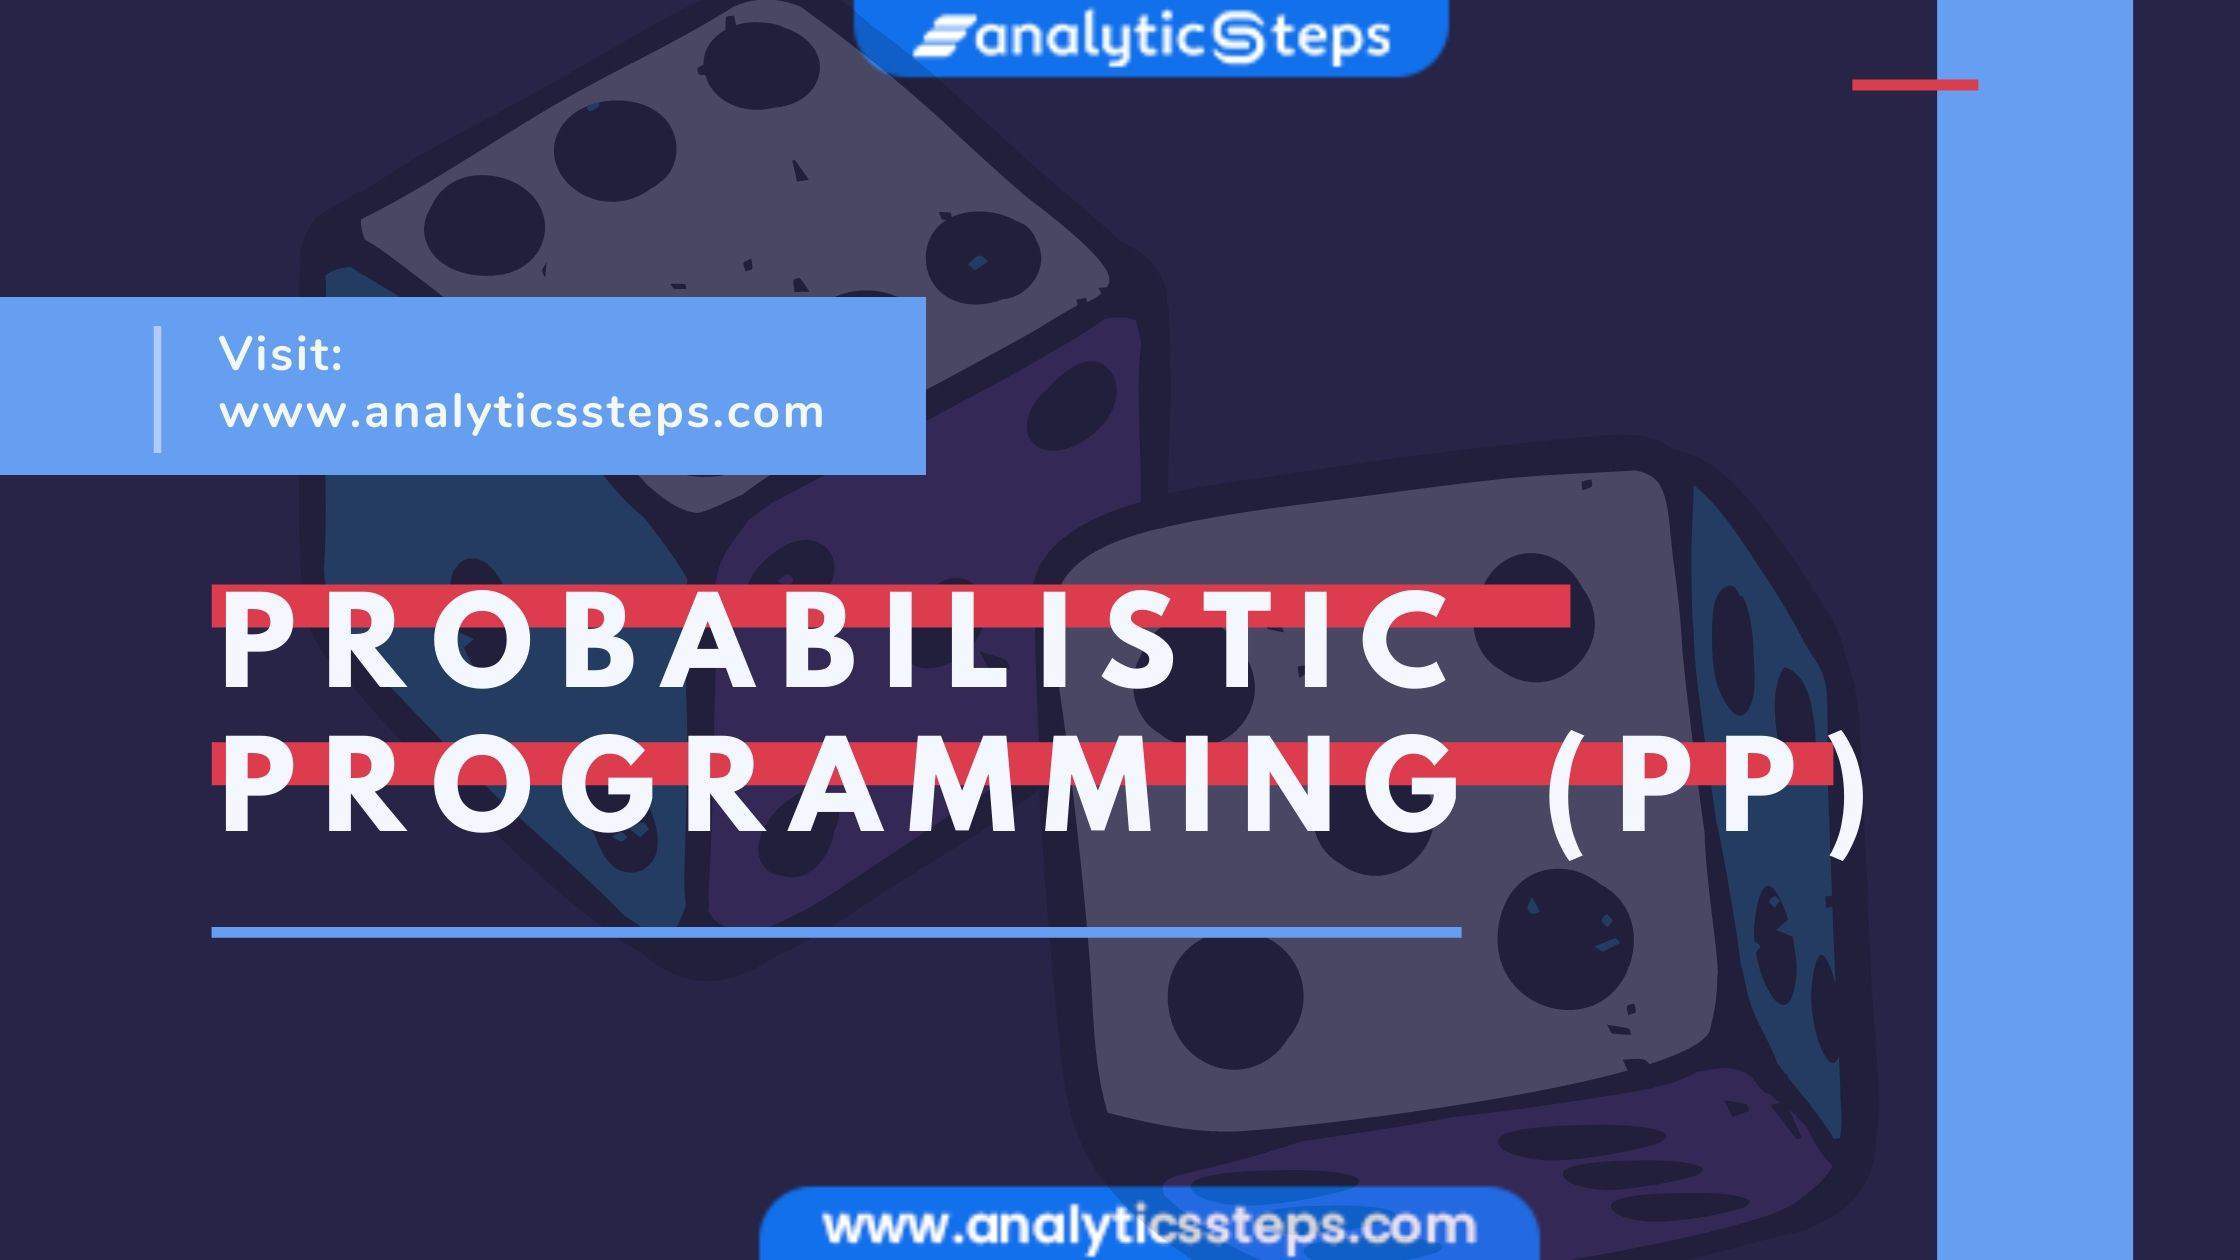 What Does Probabilistic Programming Work? title banner